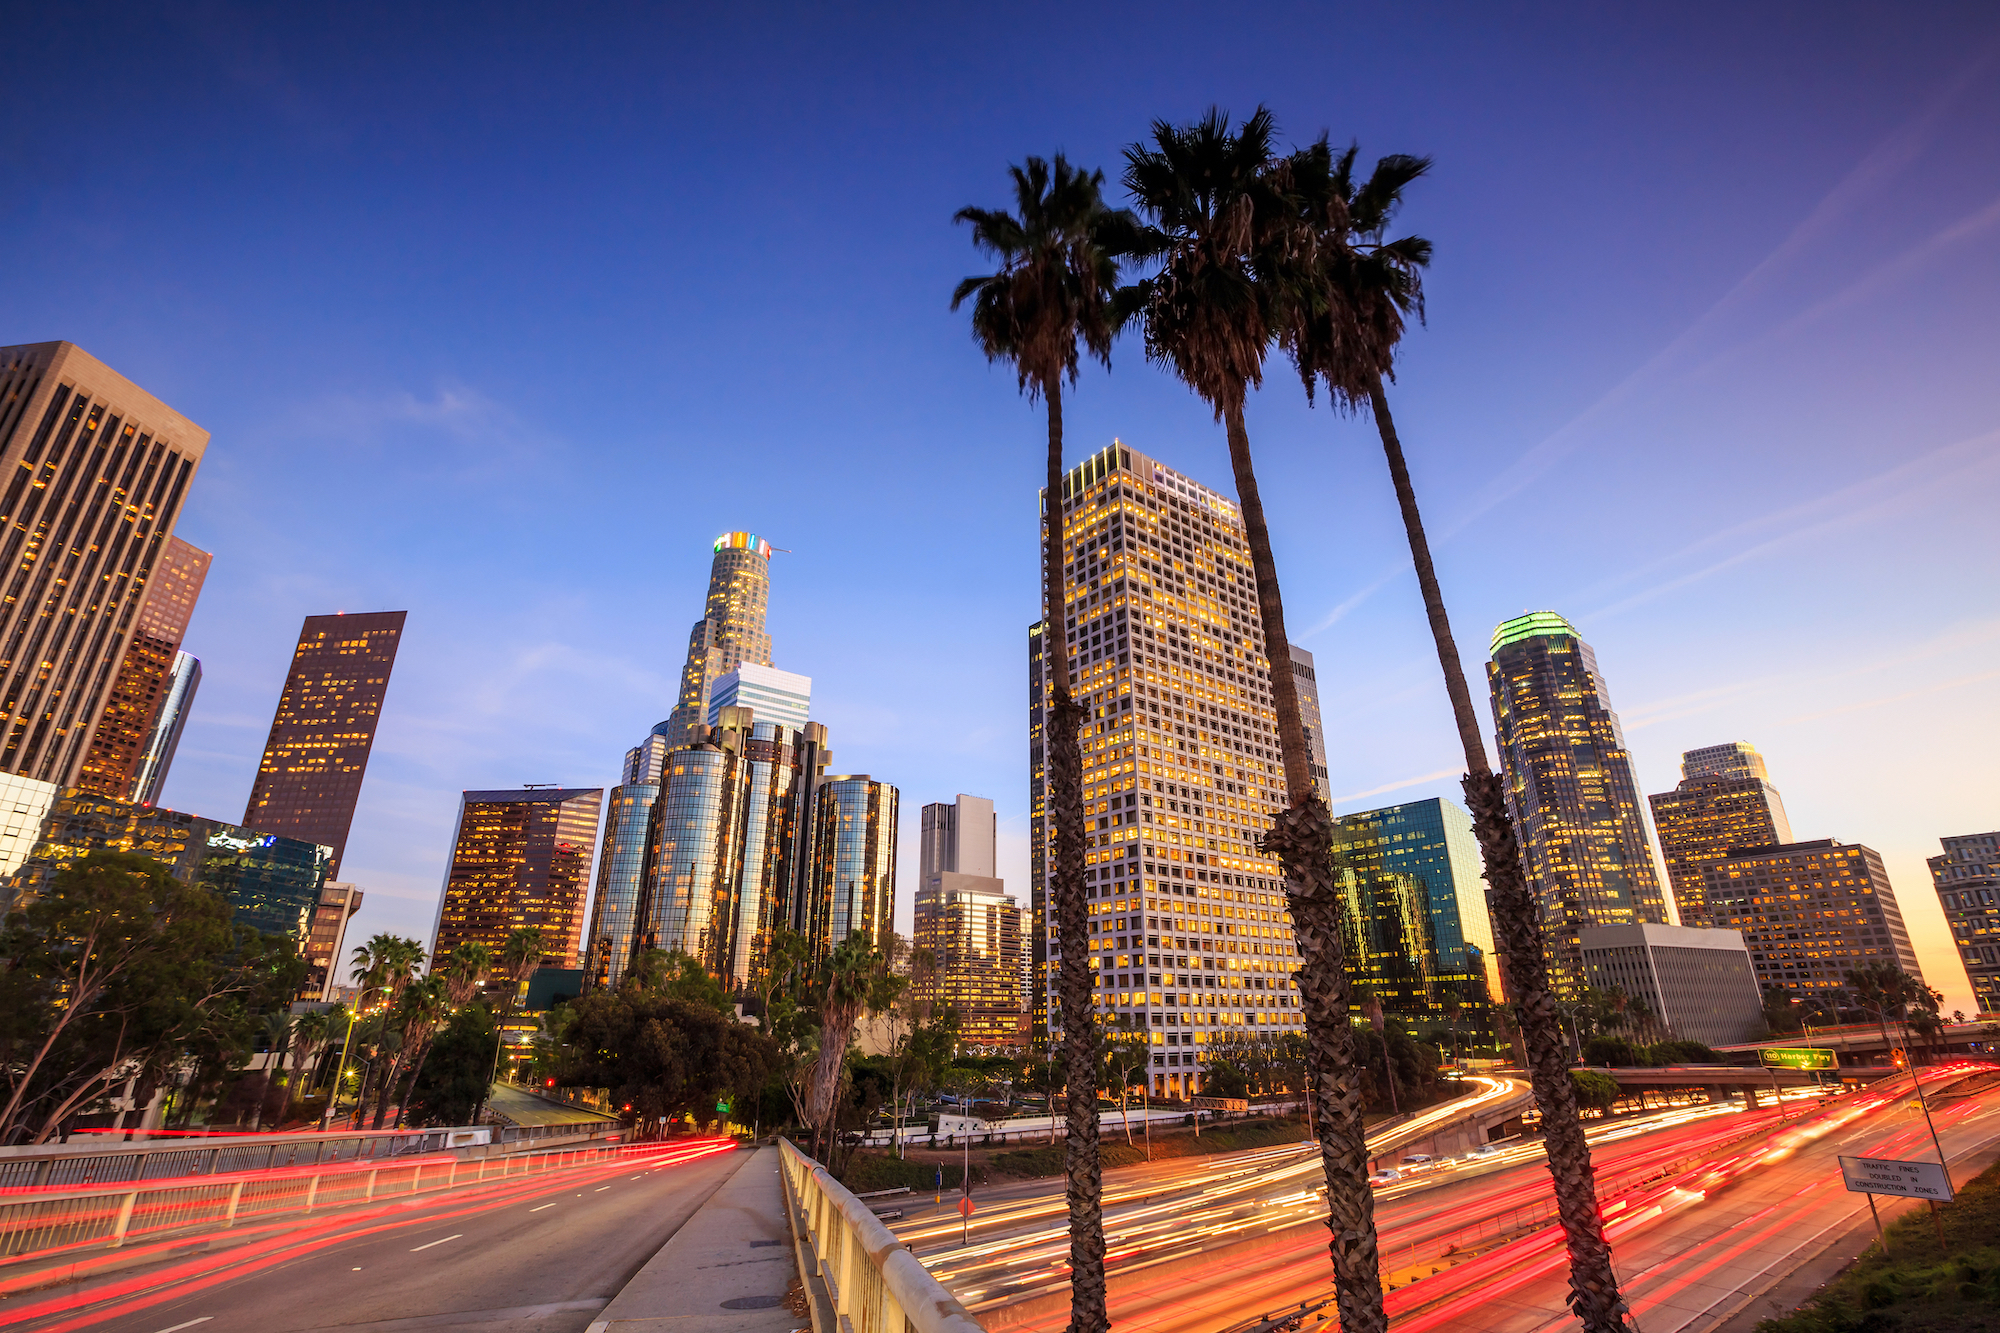 A street-level view of the Los Angeles skyline